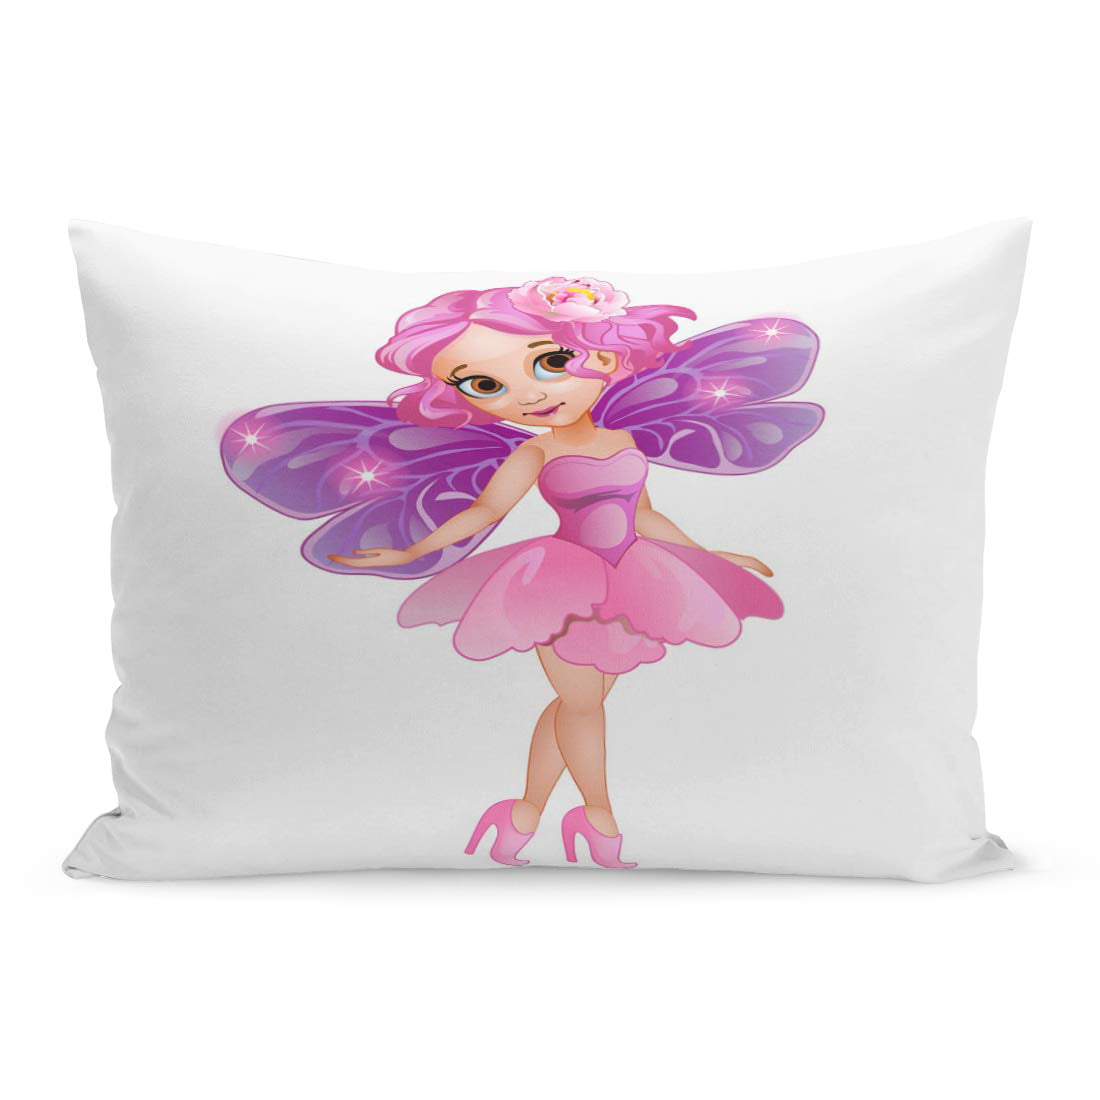 14x20.5 Inch Small Pillow Cases for Kids Two Pillowcase Covers White Angel Baby Toddler Pillow Case 2-Pack 